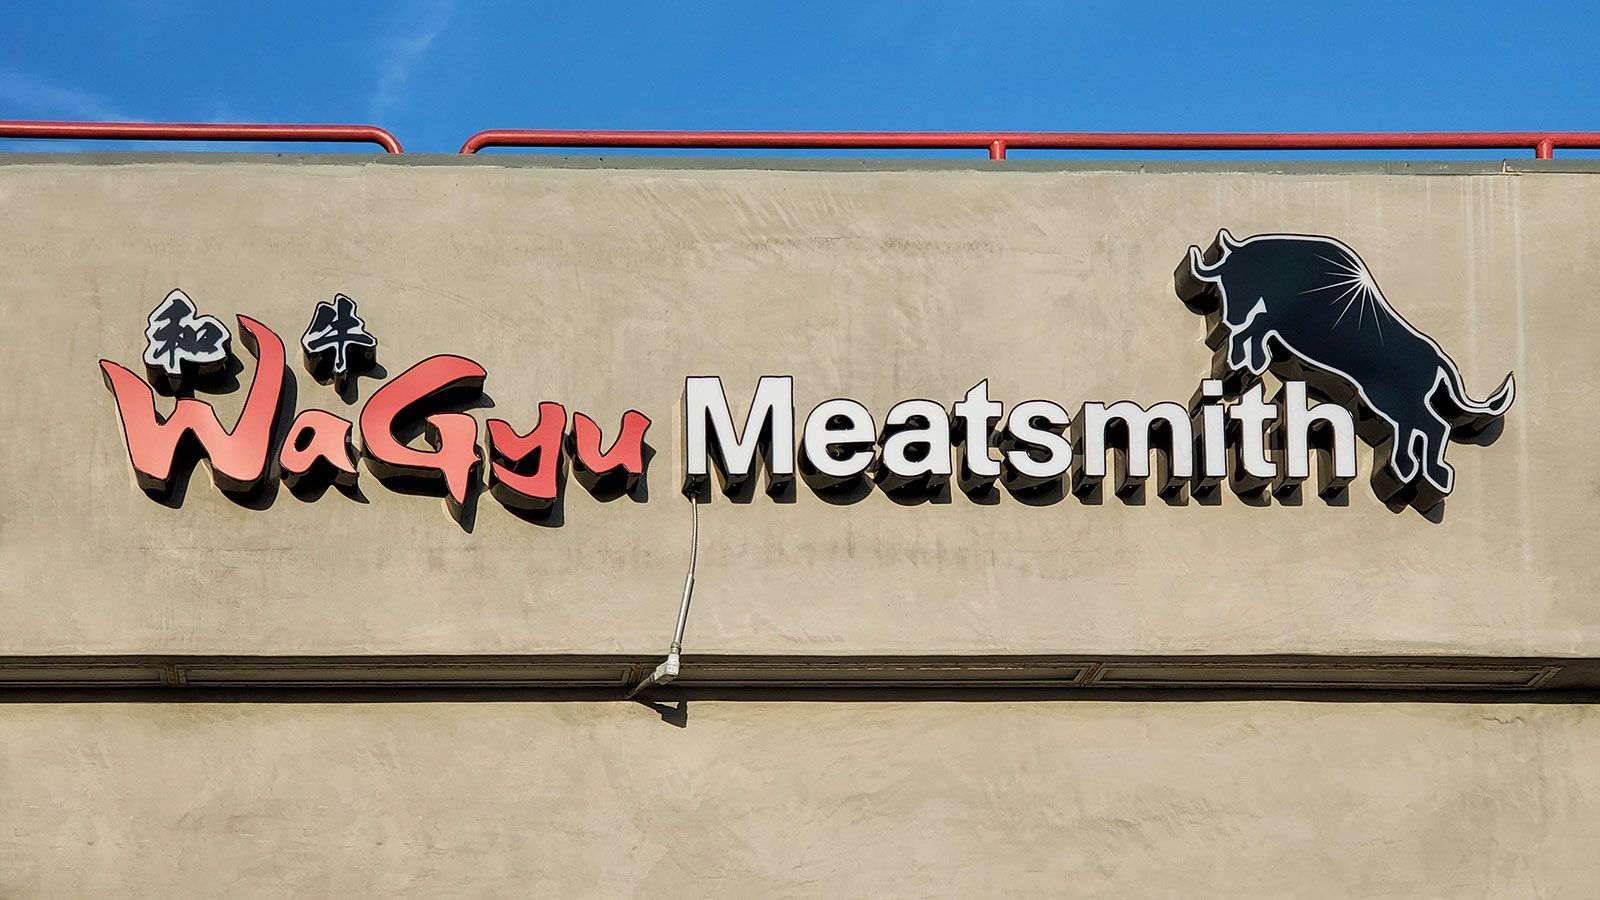 Wagyu meatsmith building sign